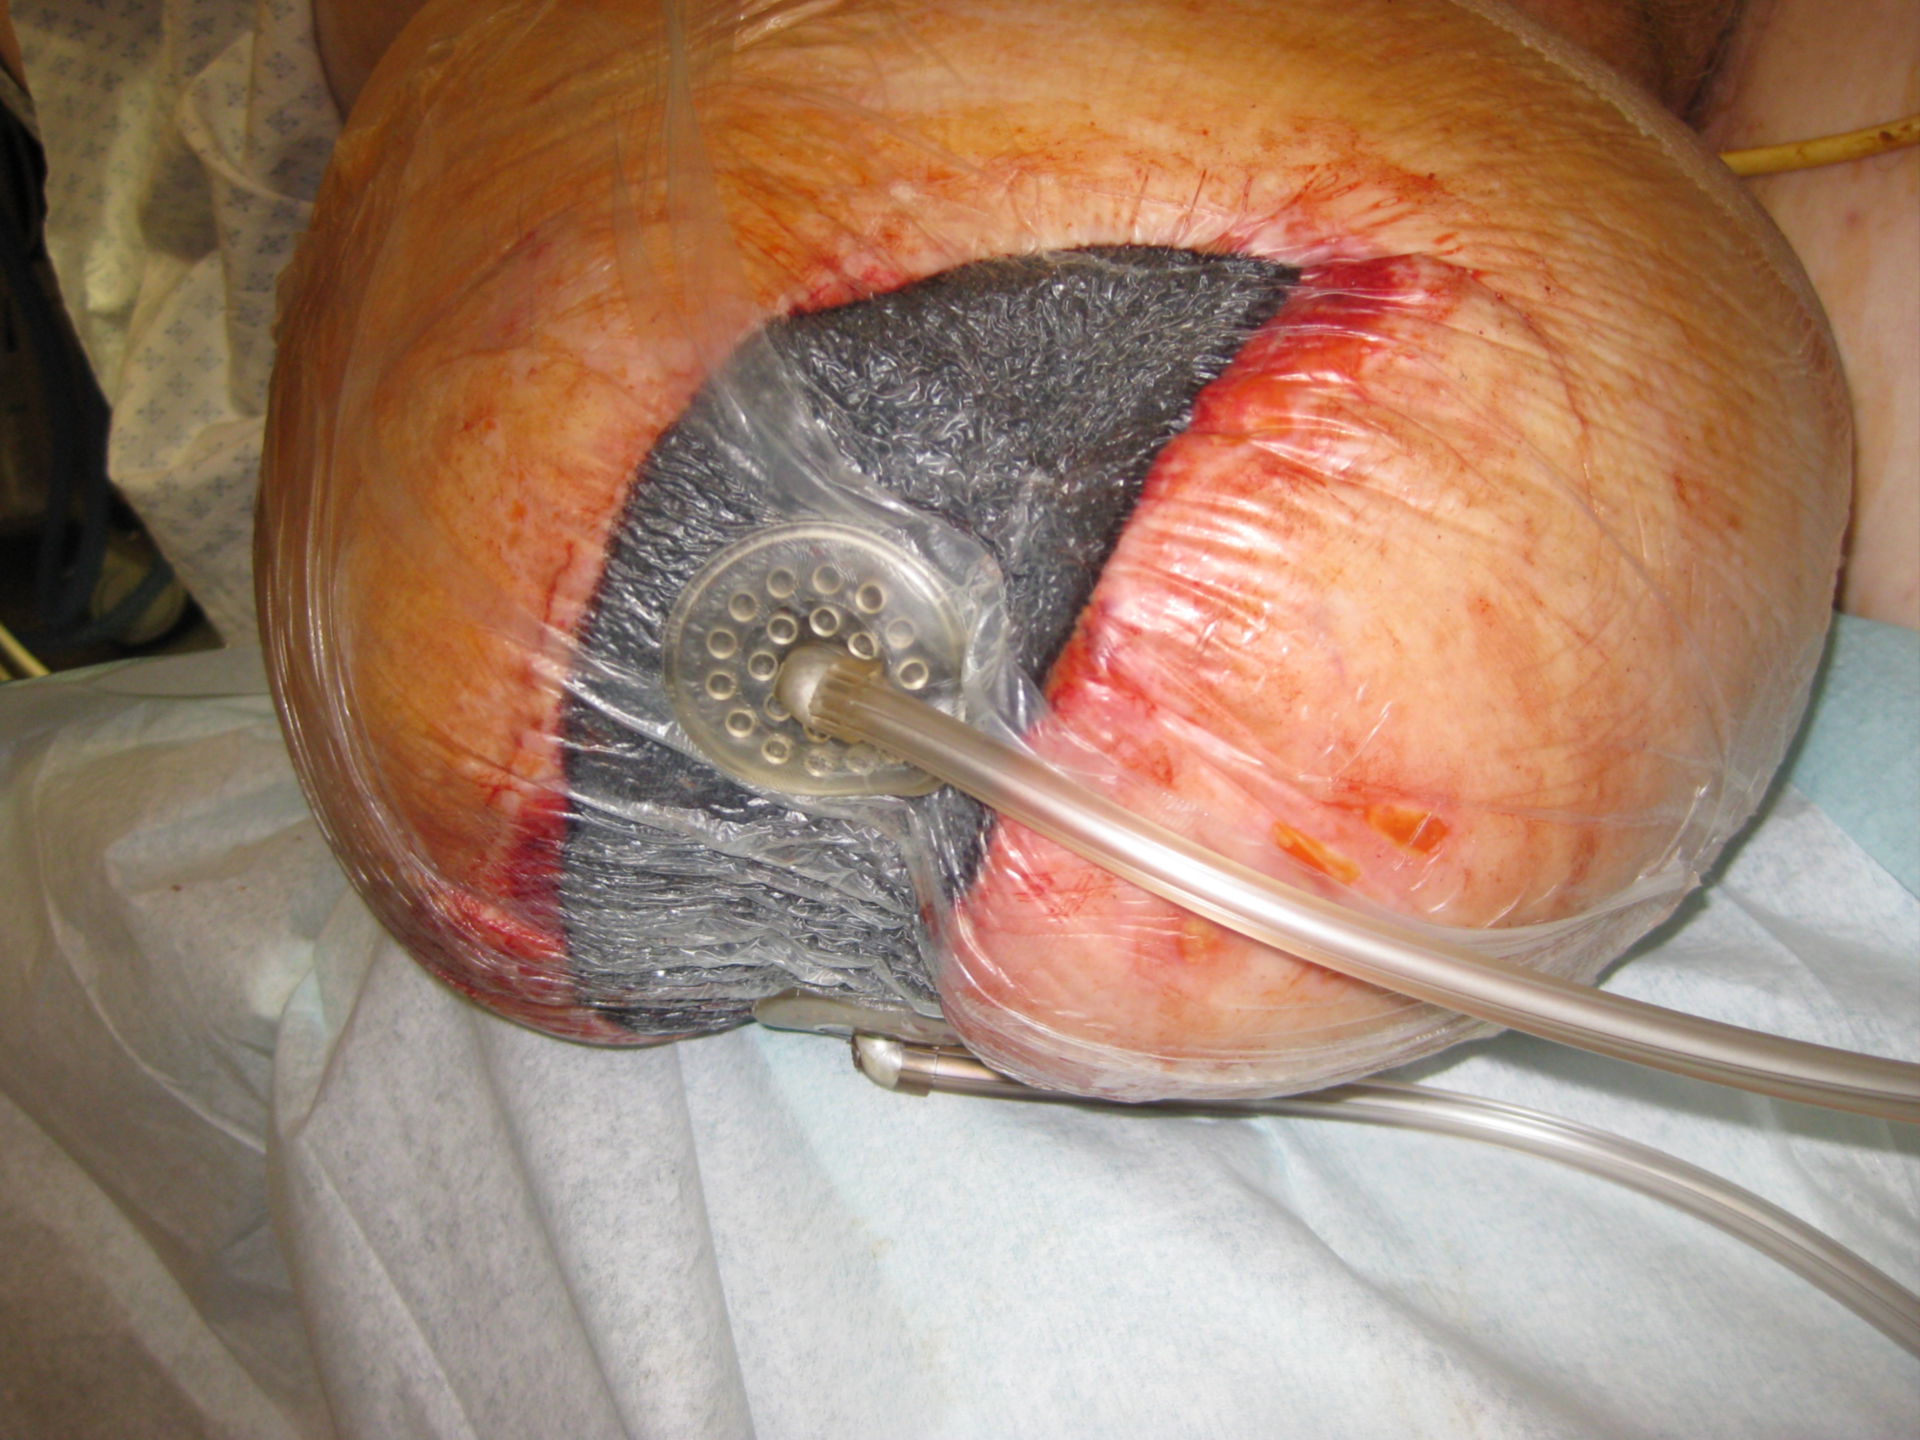 VAC treatment of an infection of the right thigh stump